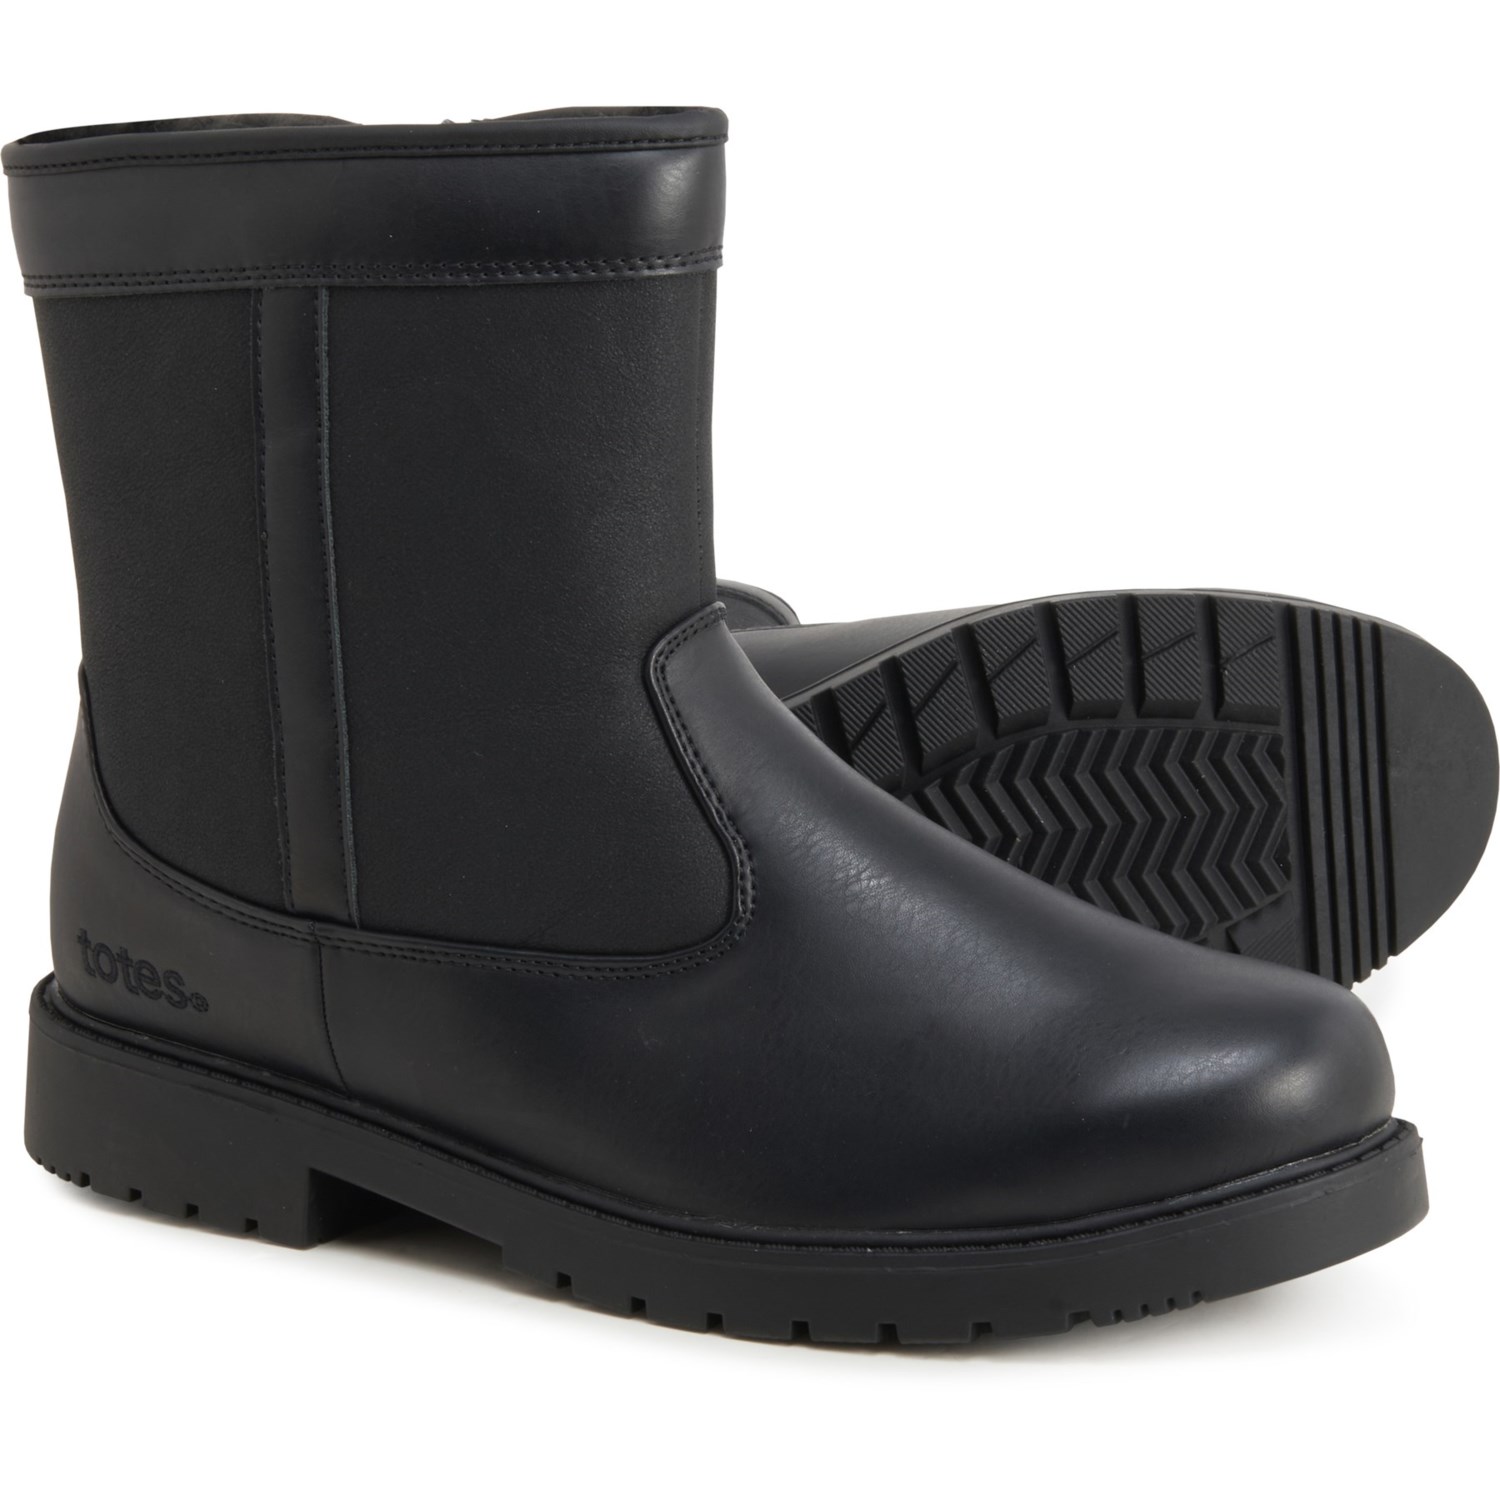 totes Stadium Snow Boots (For Men) - Save 38%